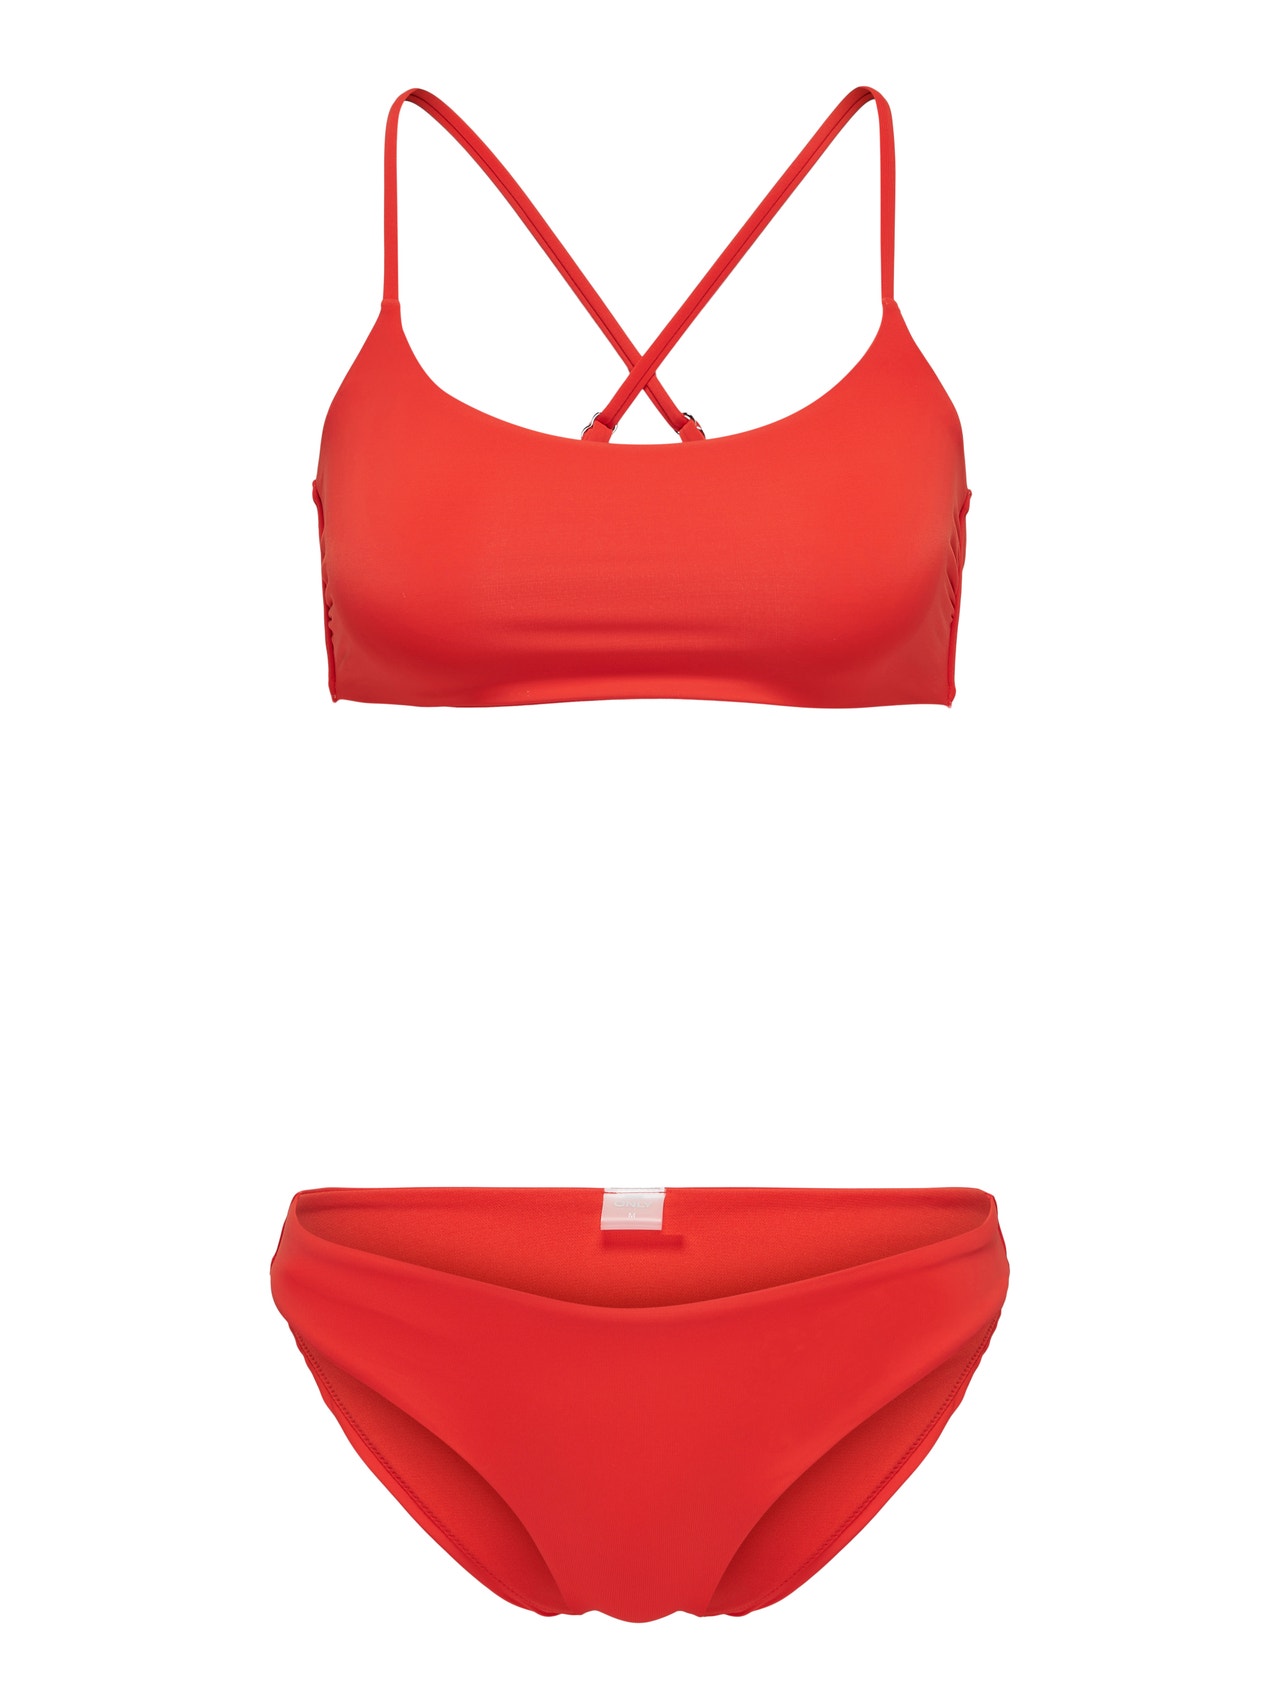 ONLY Solid Colored Bikini Set -Fiery Red - 15304059